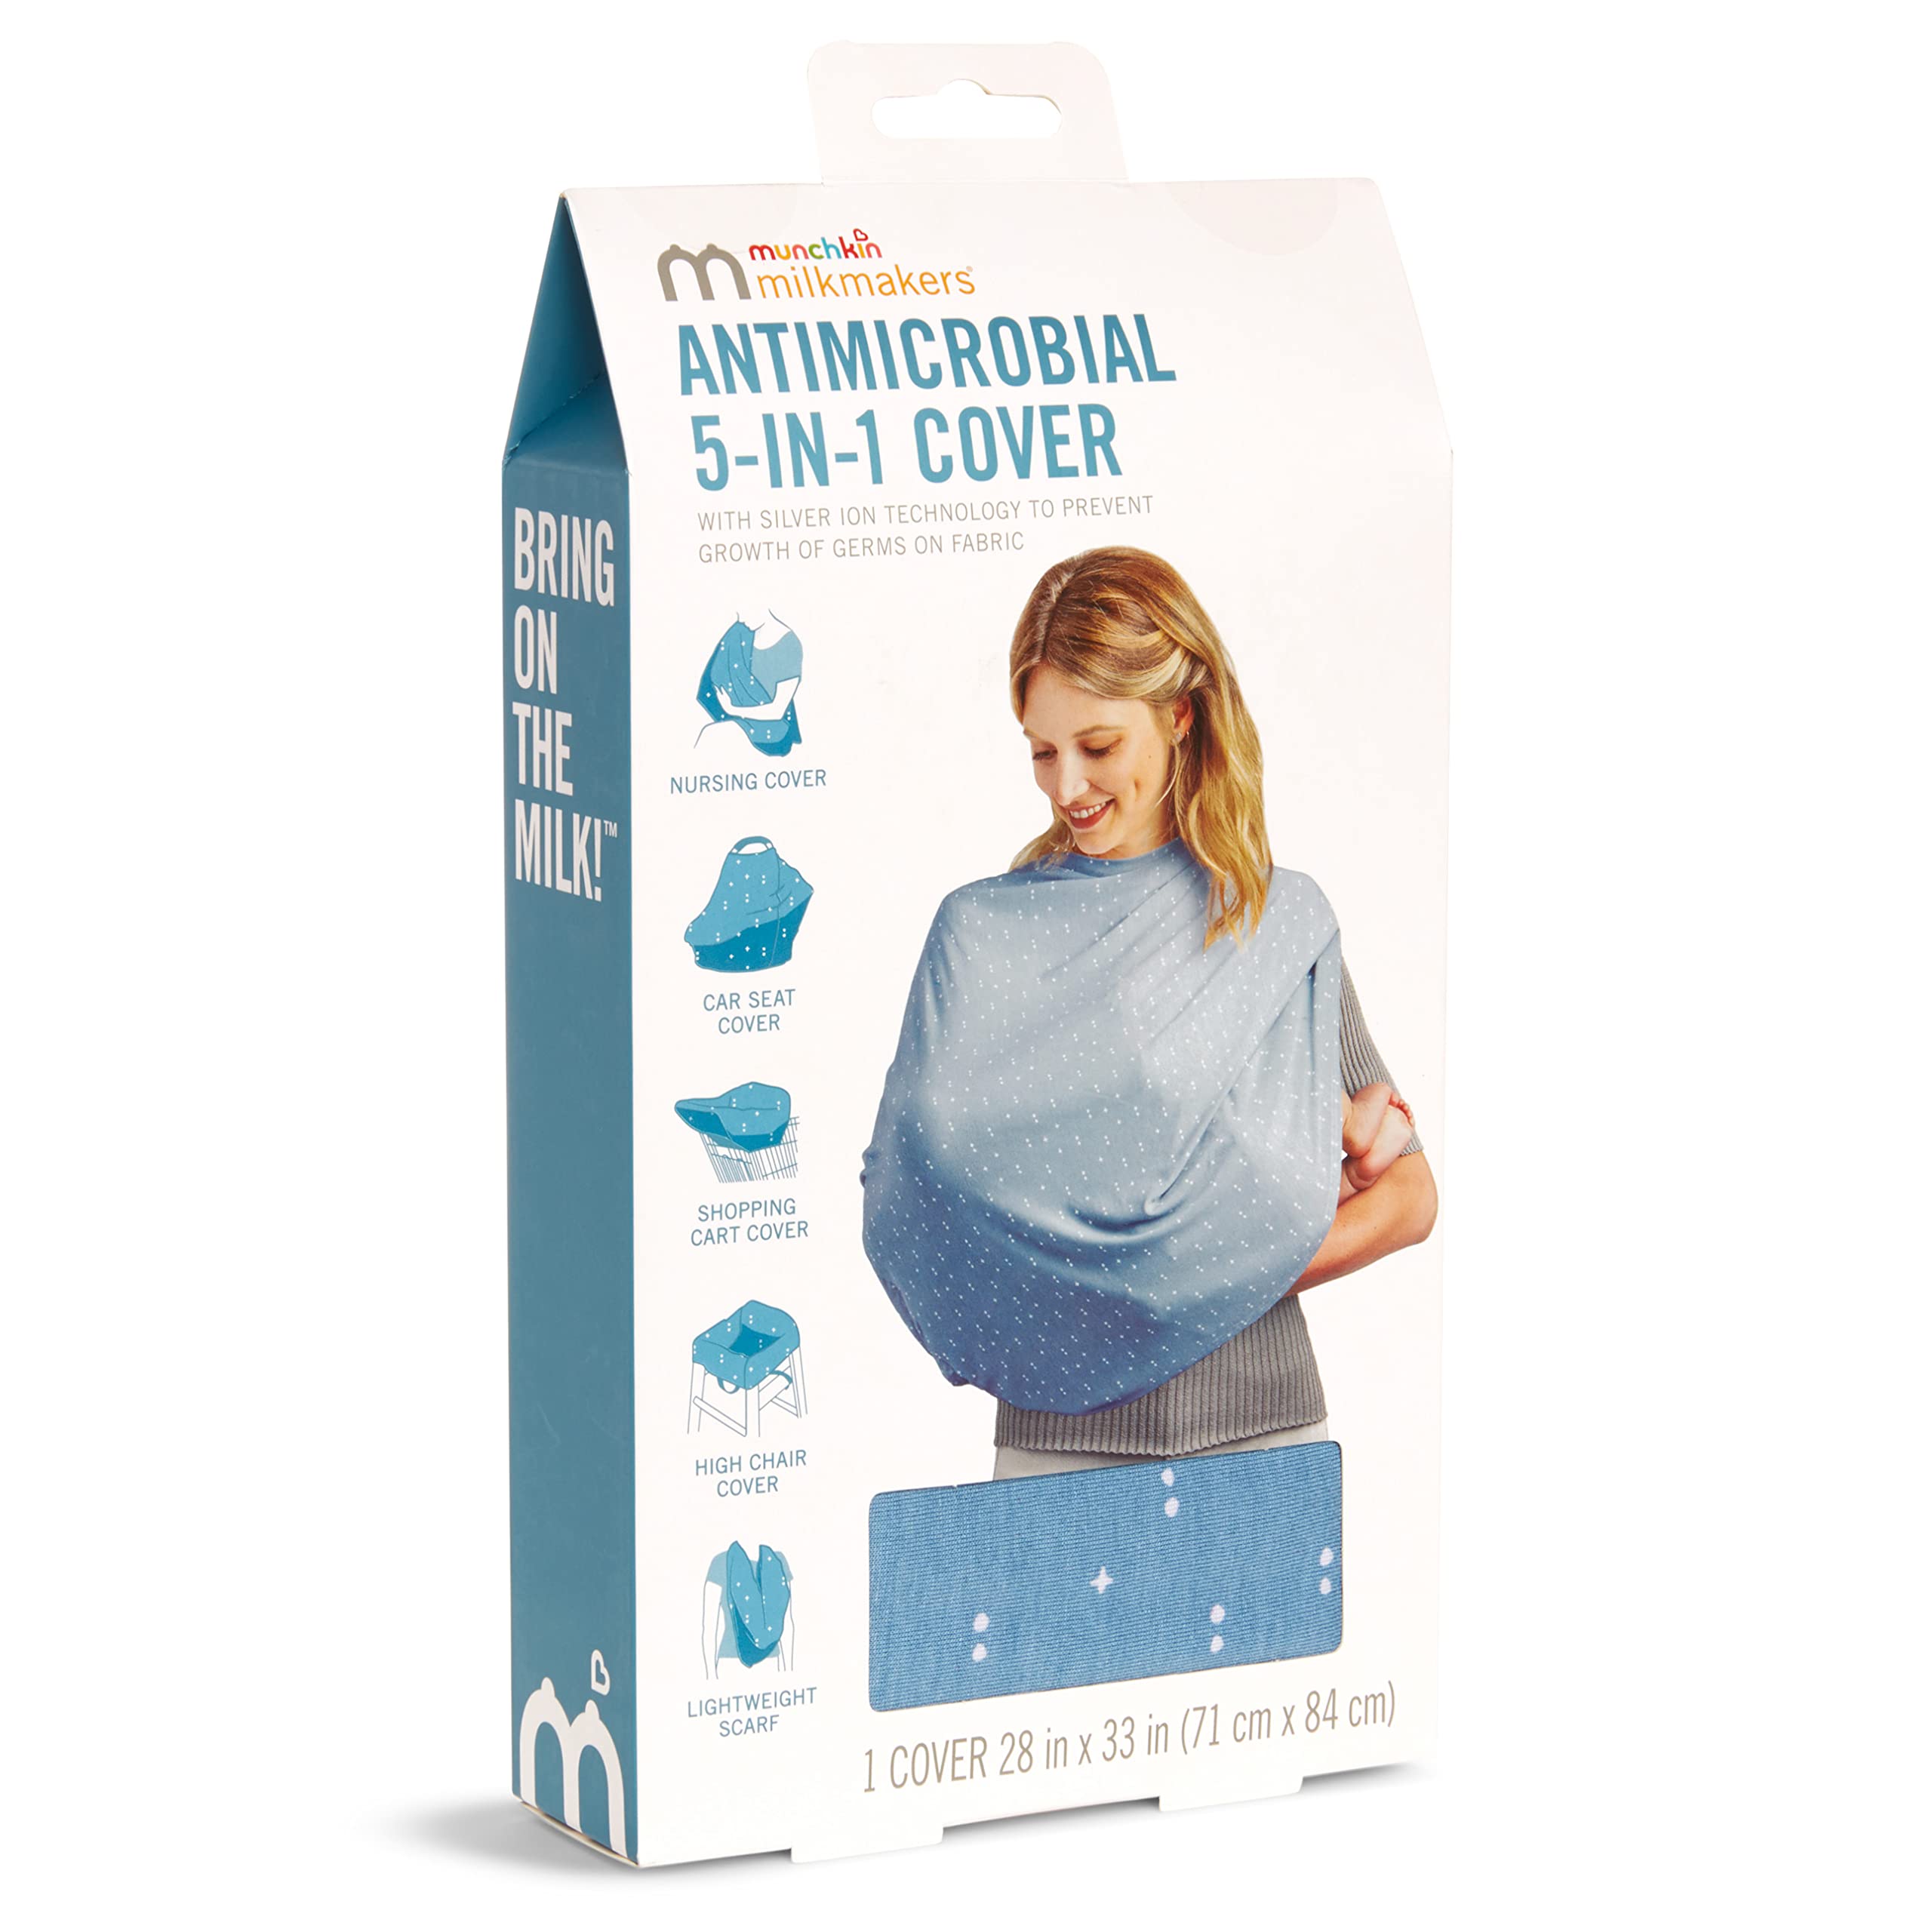 Munchkin Milkmakers Antimicrobial 5-in-1 Nursing Cover, Hipsteria Dots